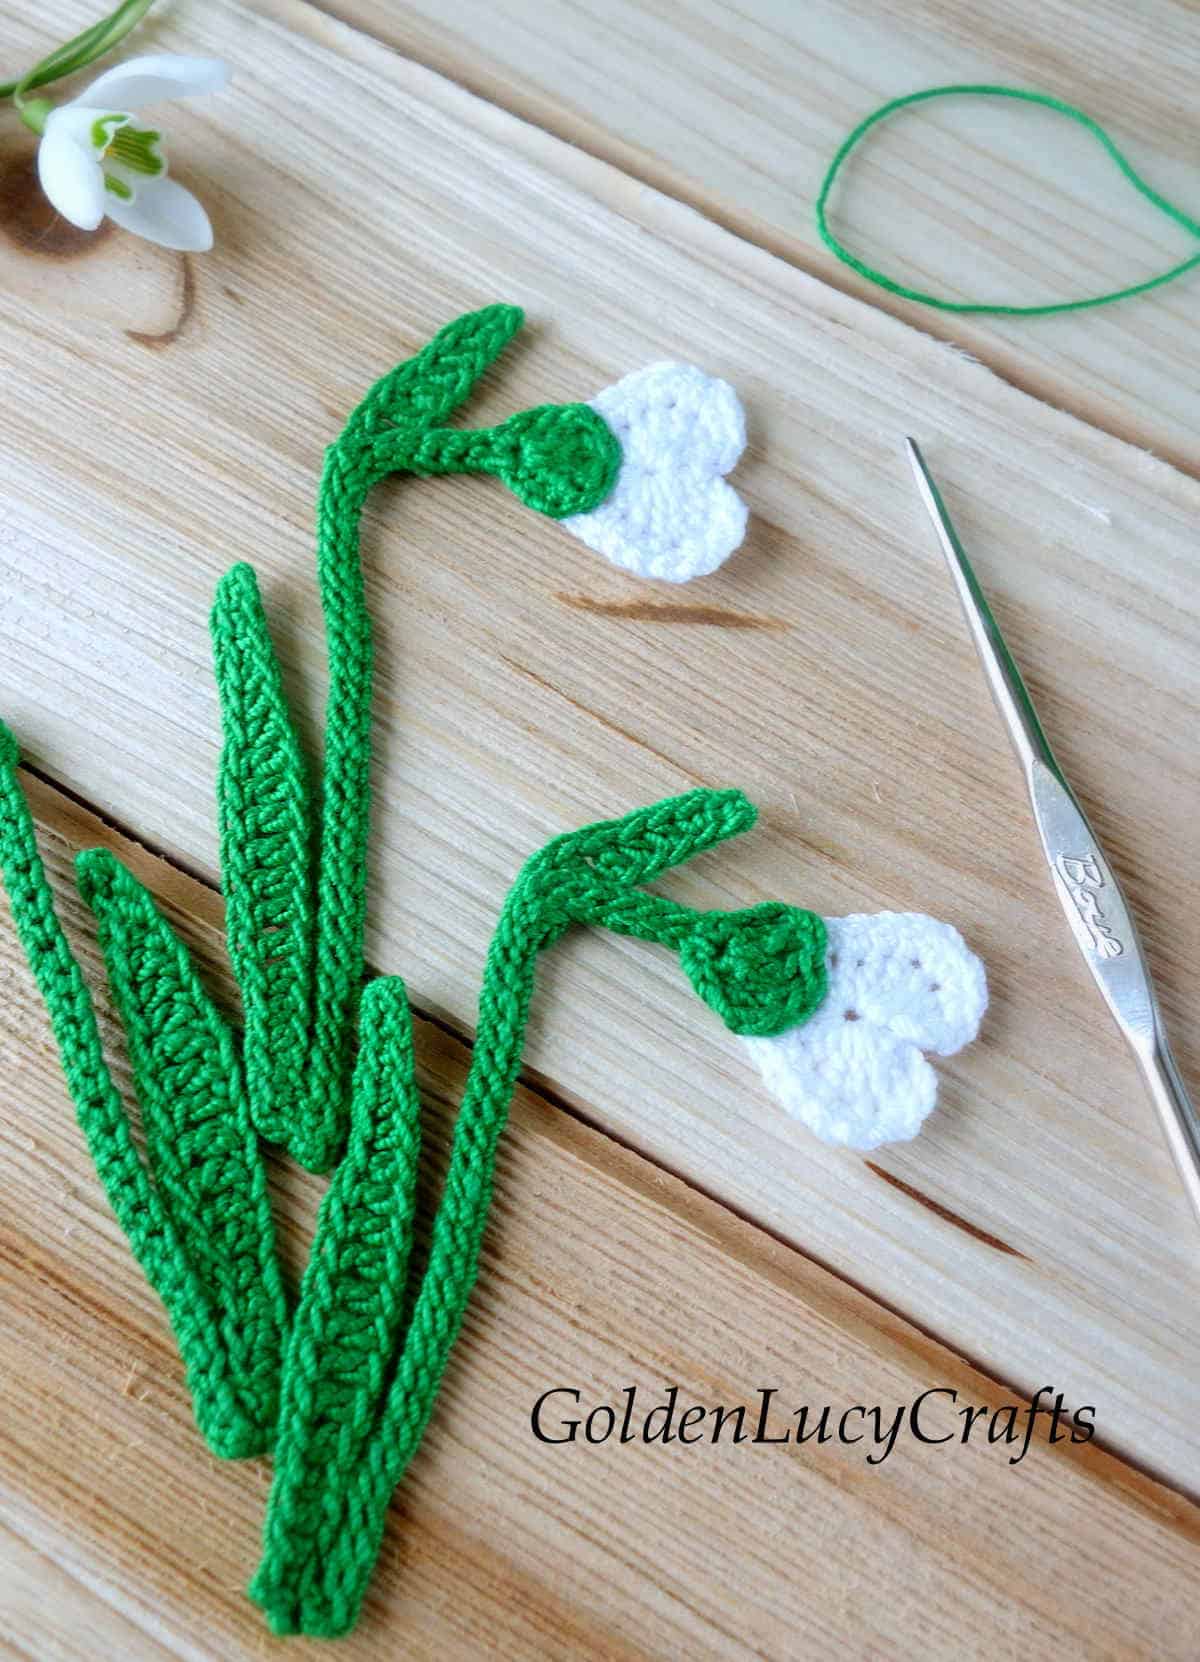 Crochet snowdrop flowers close up picture.